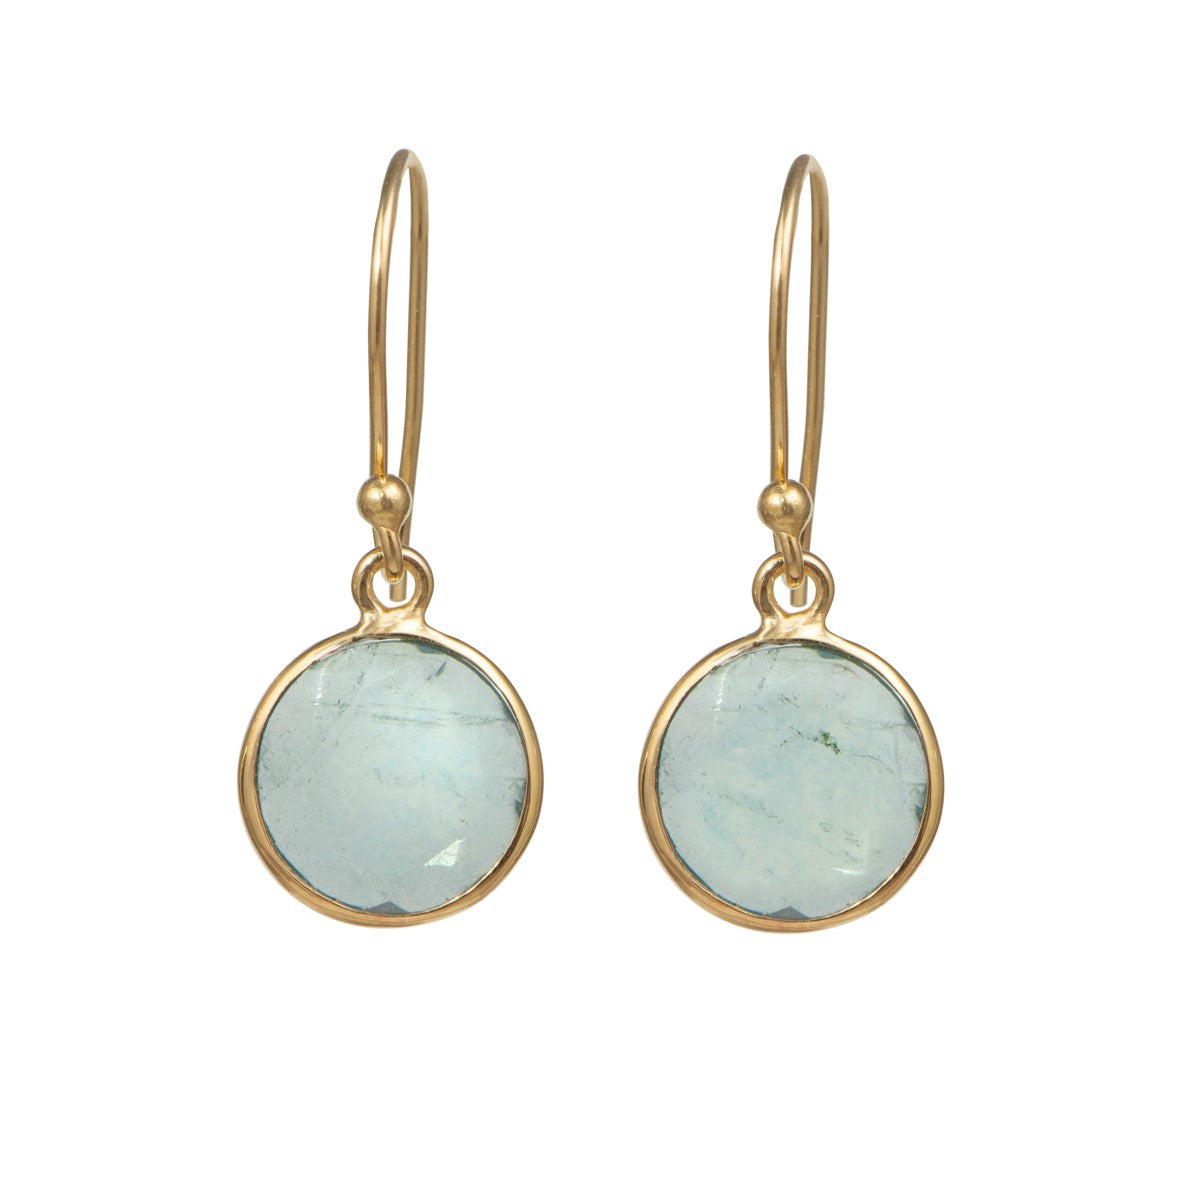 Apatite Gold Plated Sterling Silver Earrings with a Round Faceted Gemstone Drop